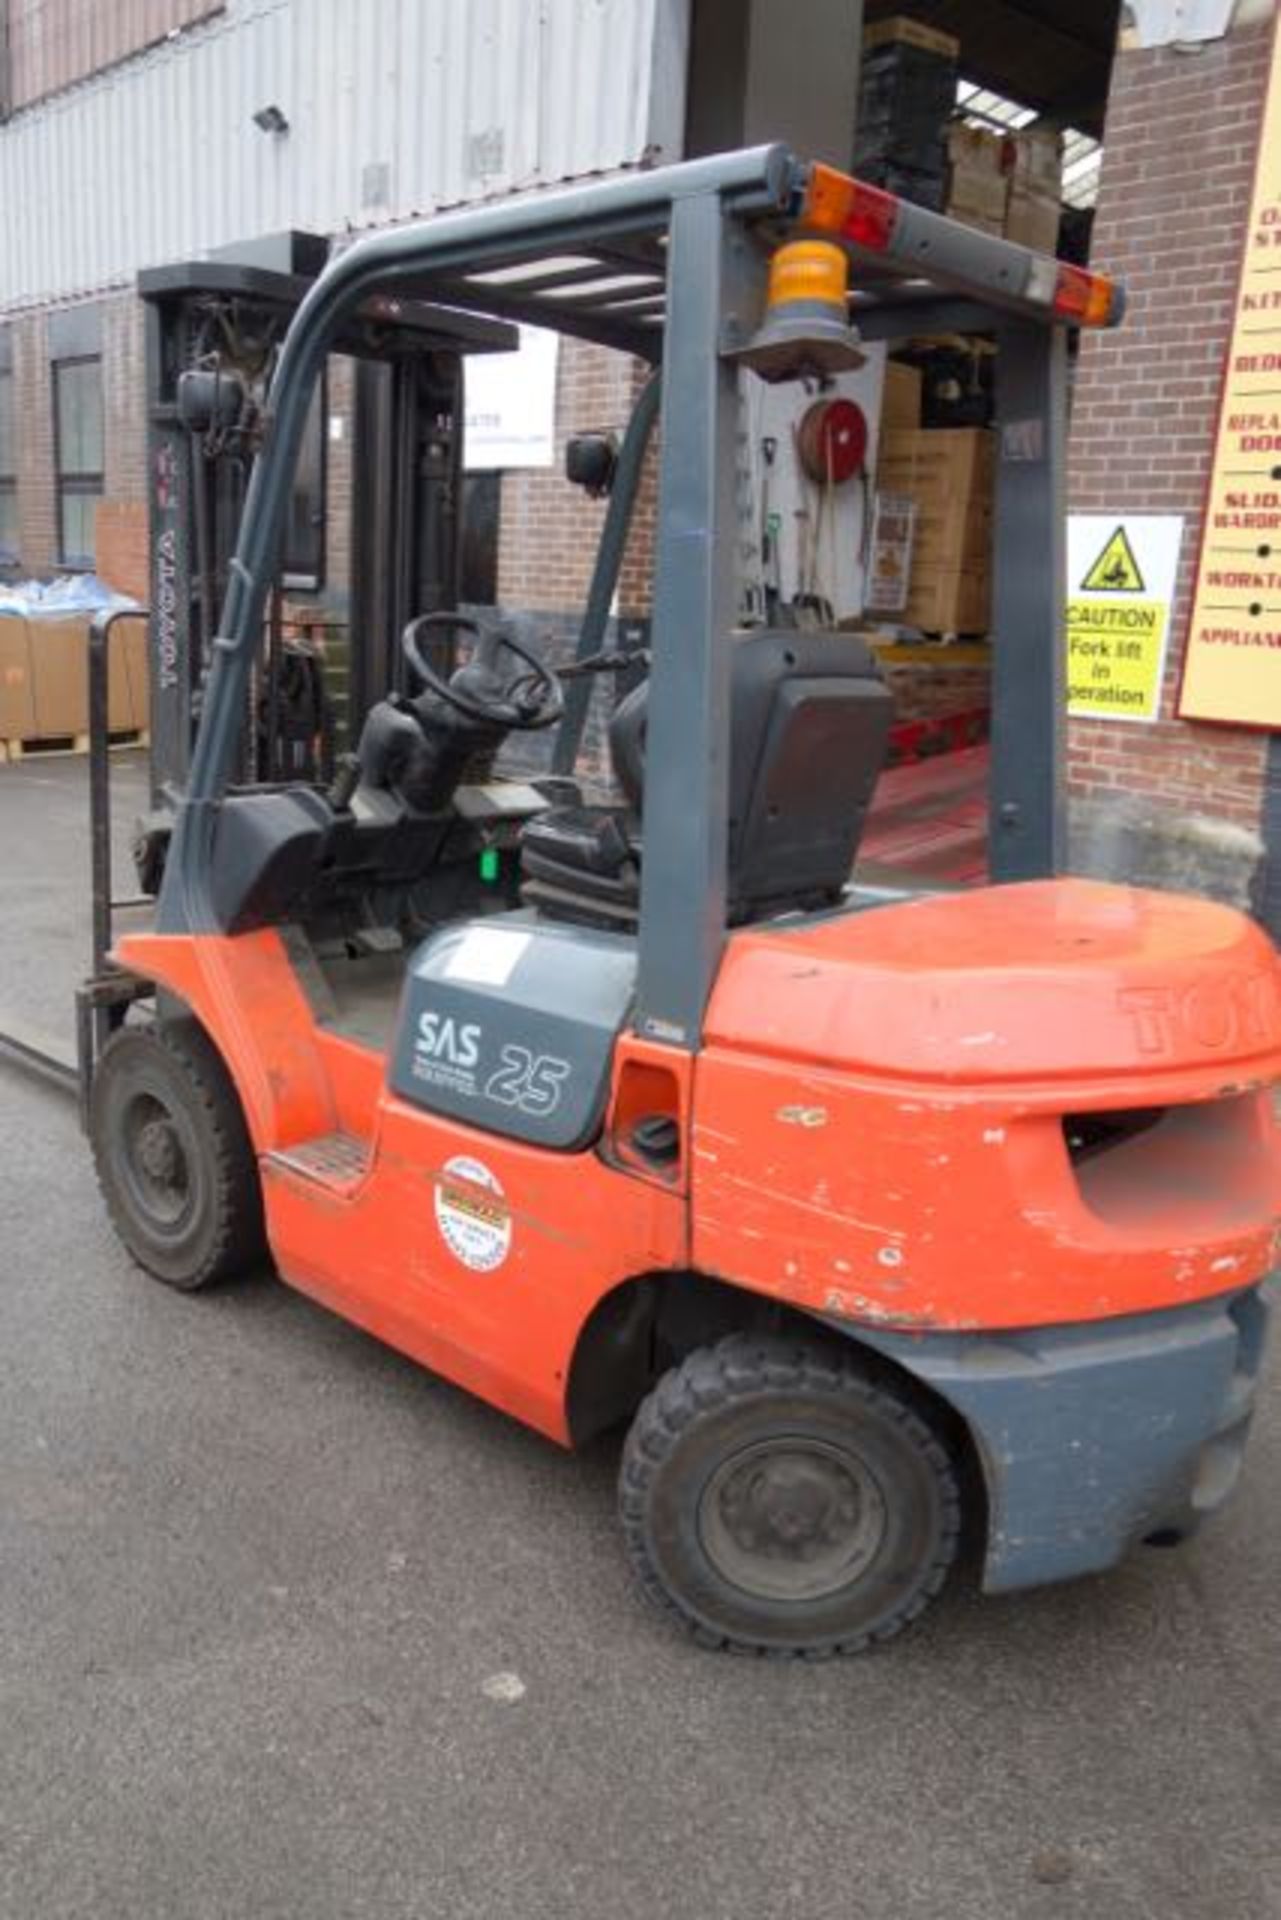 2003 Toyota 25 2.5 Tonne Diesel Forklift Truck. Max lift height. 4.1m. Side Shift. Full Working - Image 8 of 8